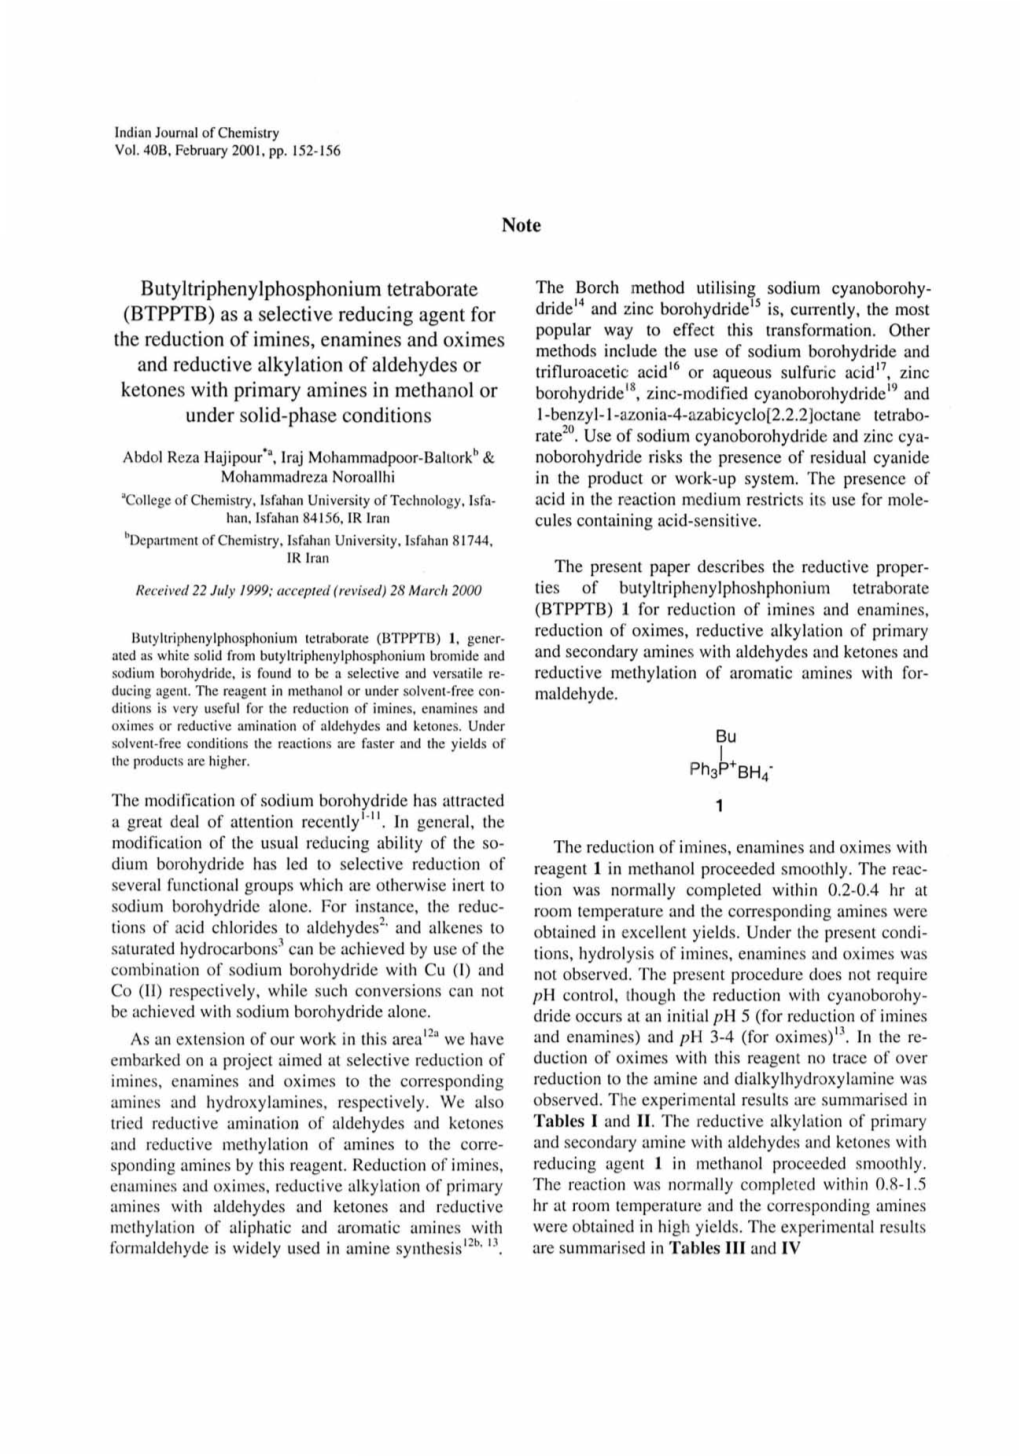 As a Selective Reducing Agent for the Reduction of Imines